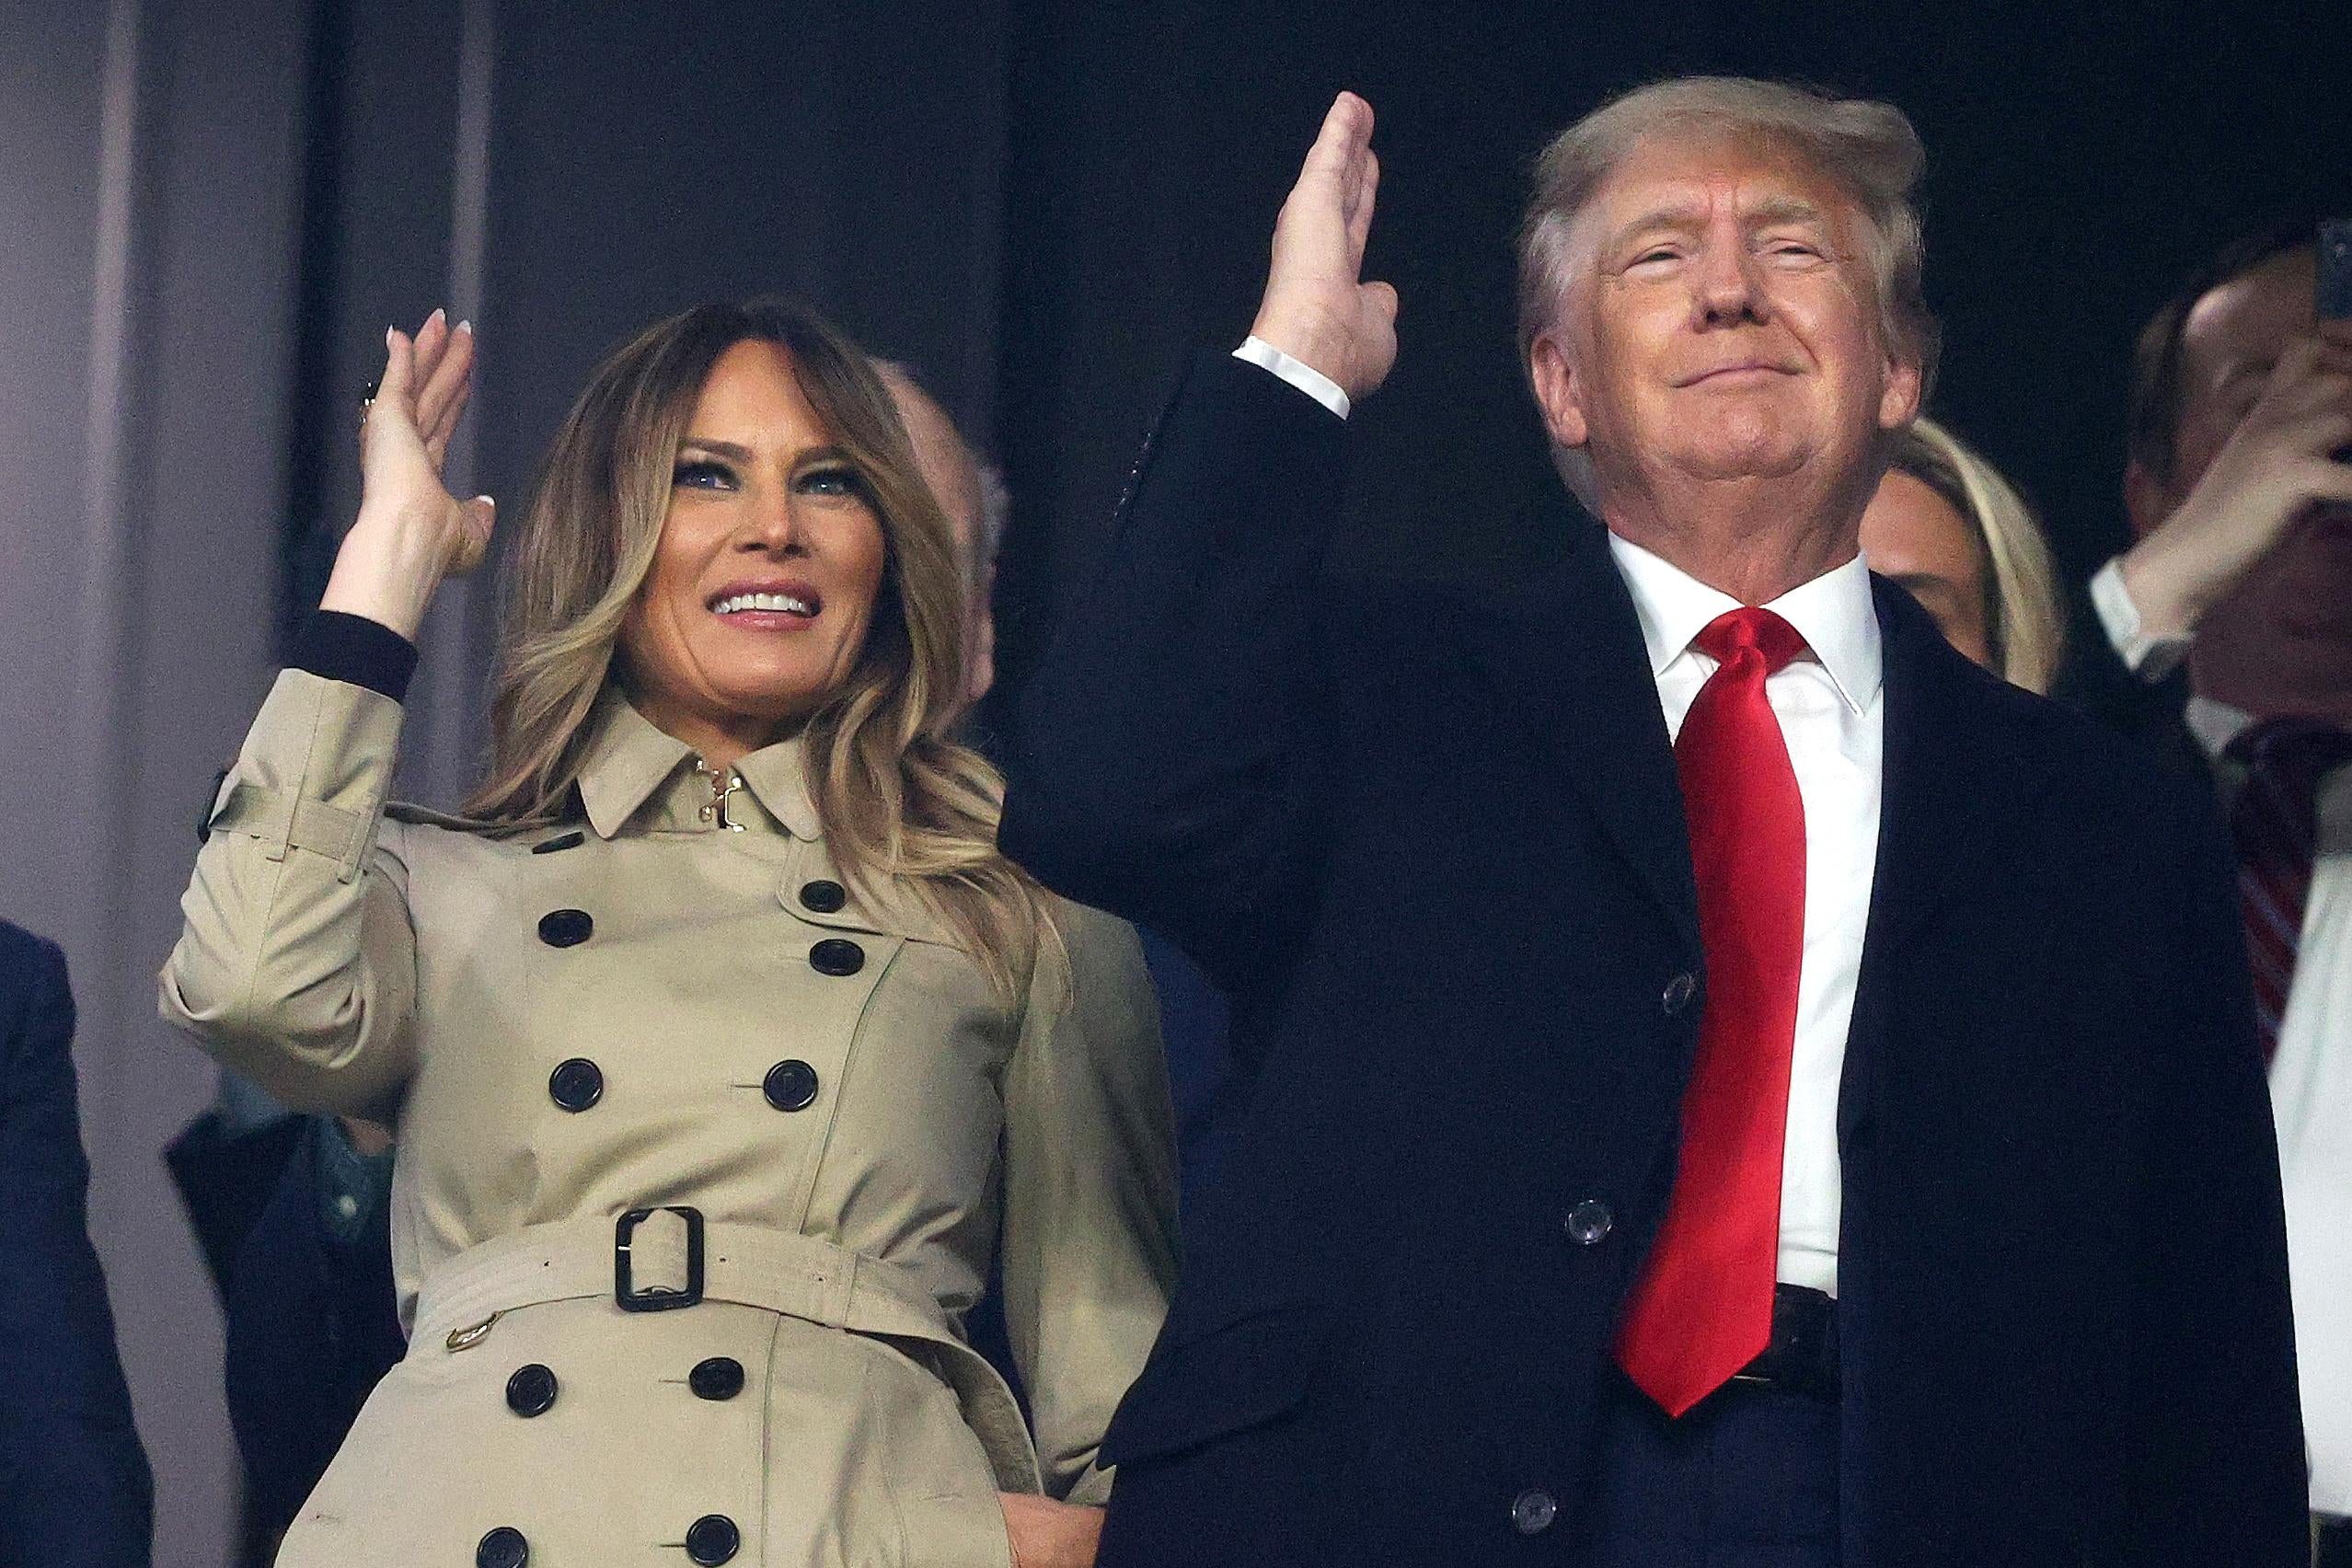 Former first lady and president of the United States Melania and Donald Trump do "the chop" prior to Game Four of the World Series between the Houston Astros and the Atlanta Braves Truist Park on October 30, 2021 in Atlanta, Georgia. 